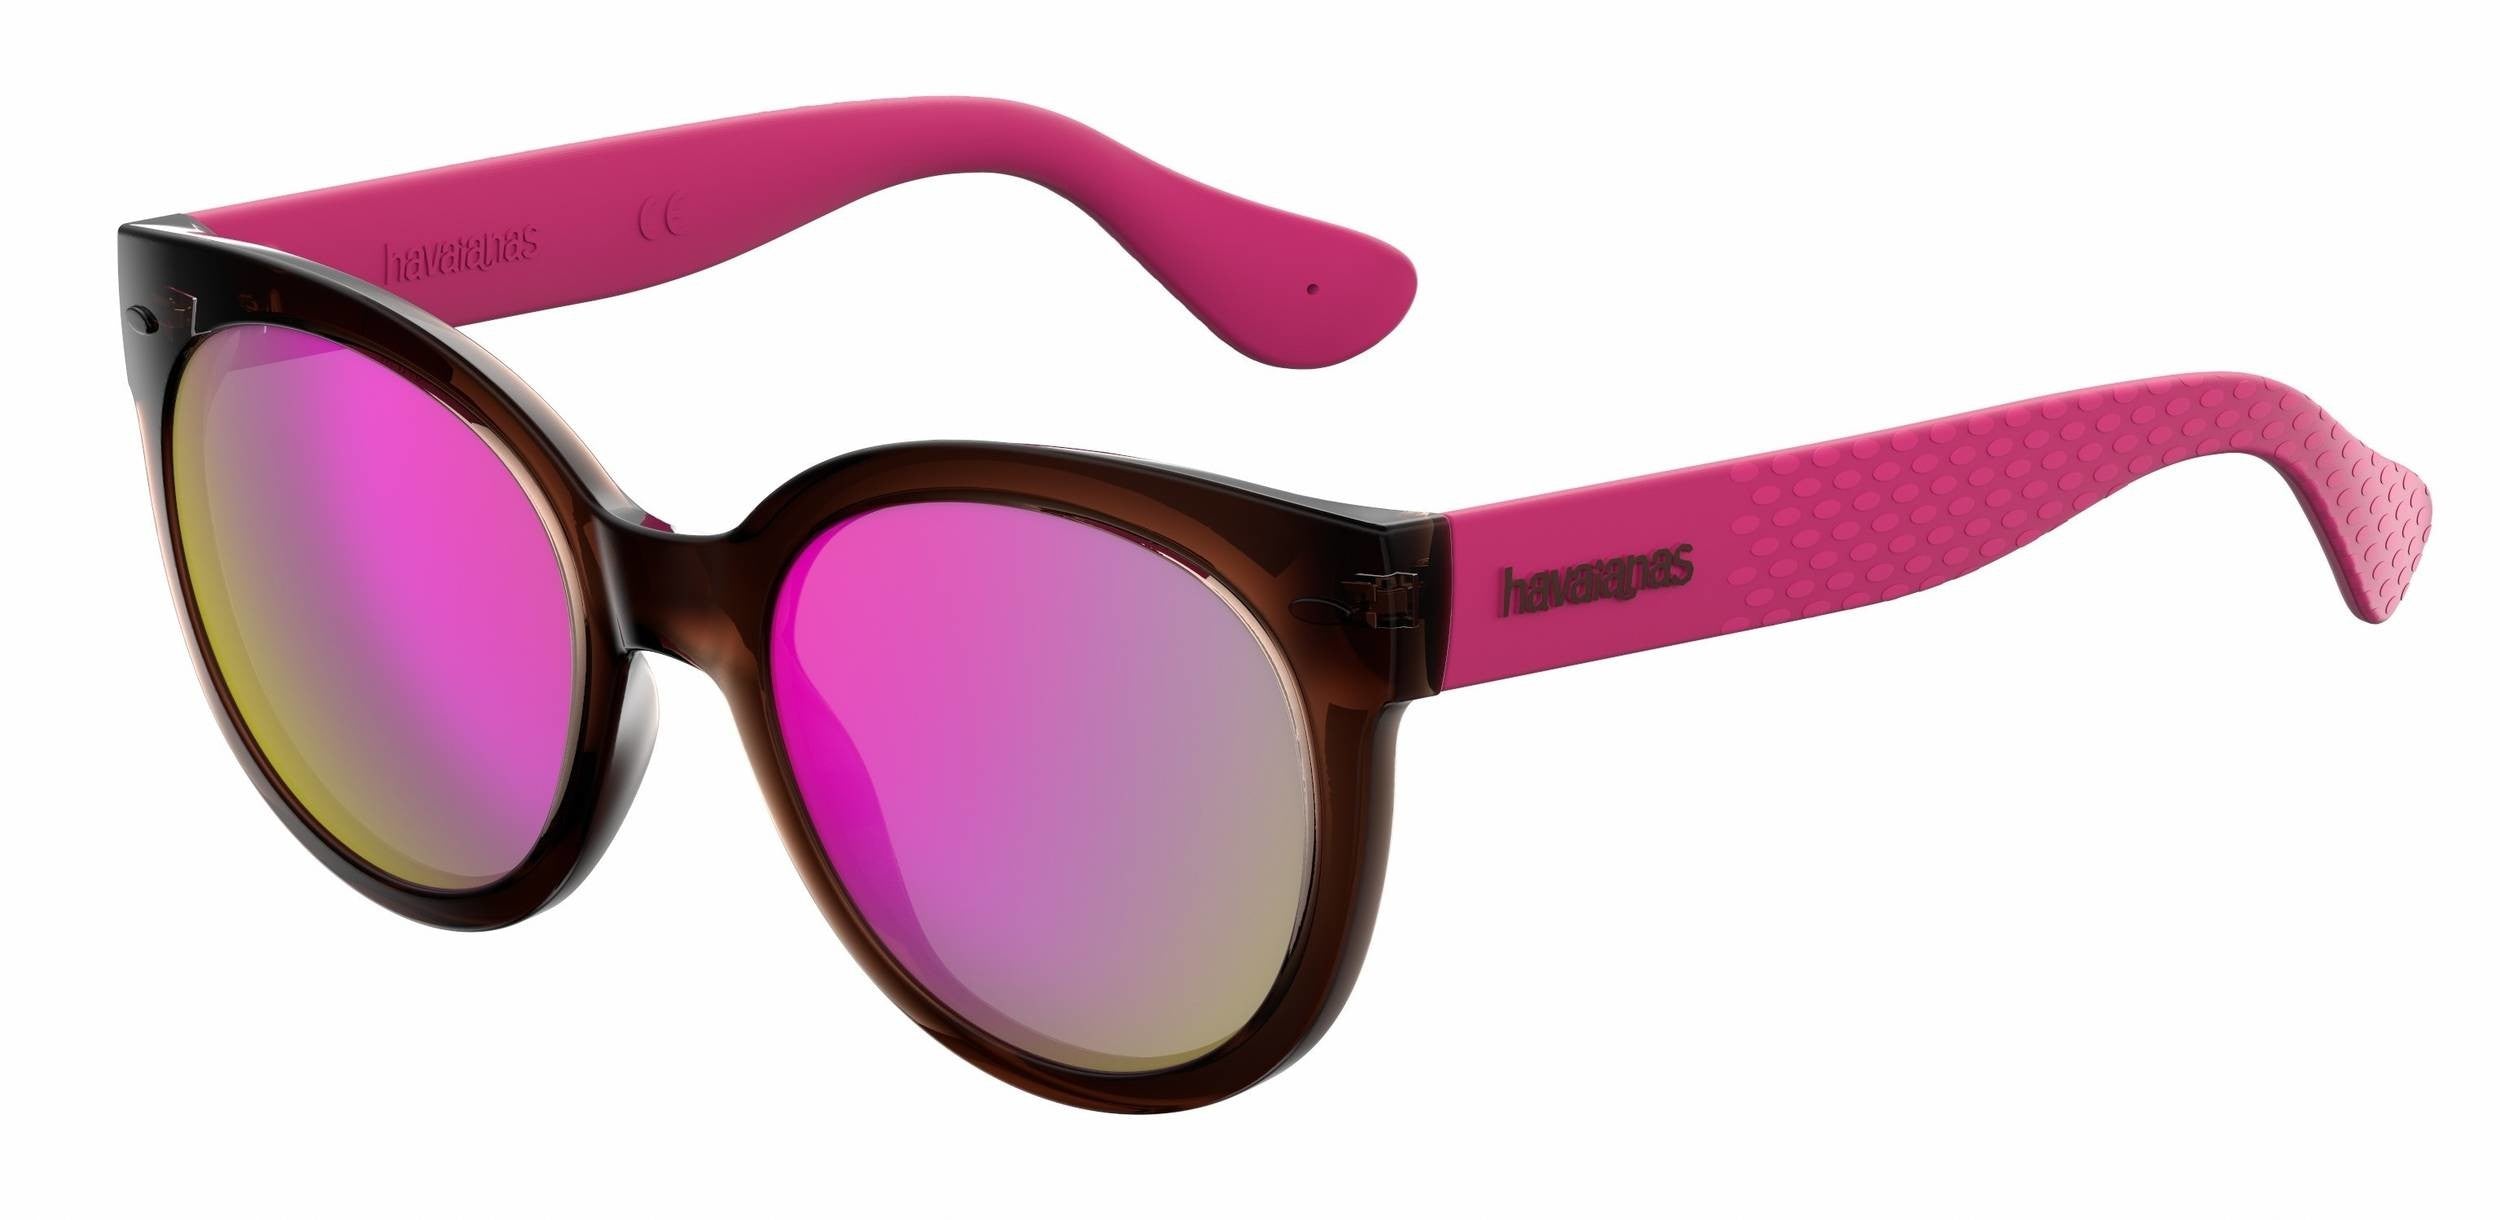 Havaianas Noronha/M Cat Eye/butterfly Sunglasses 0QT3-0QT3  Brown Pink (VQ Pink Multilayer)